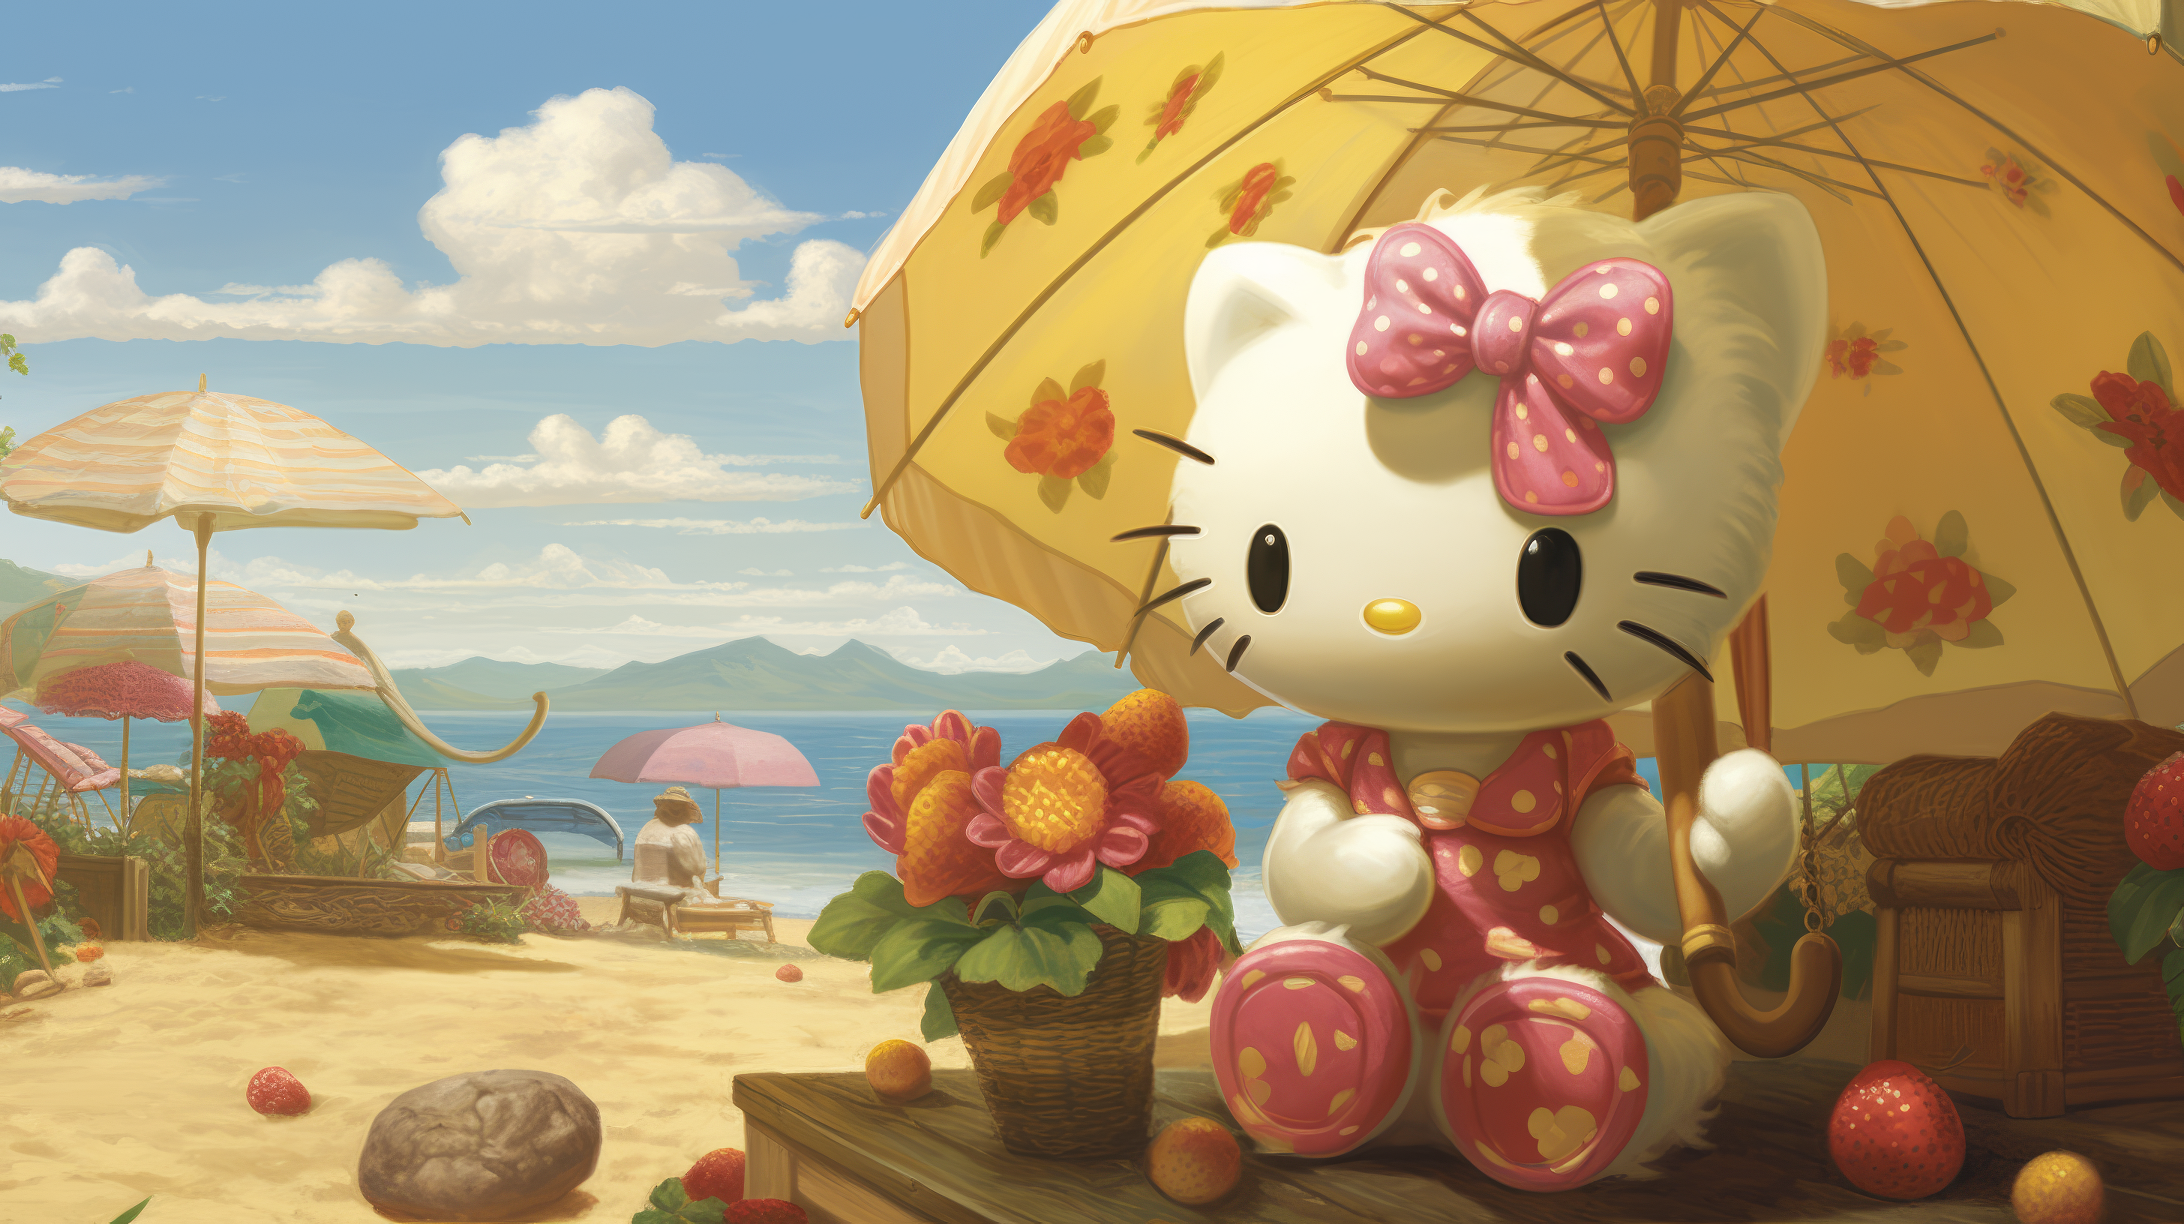 HD wallpaper of cute Hello Kitty under a sun umbrella on a sandy beach with flowers and a scenic ocean view, ideal for desktop background.